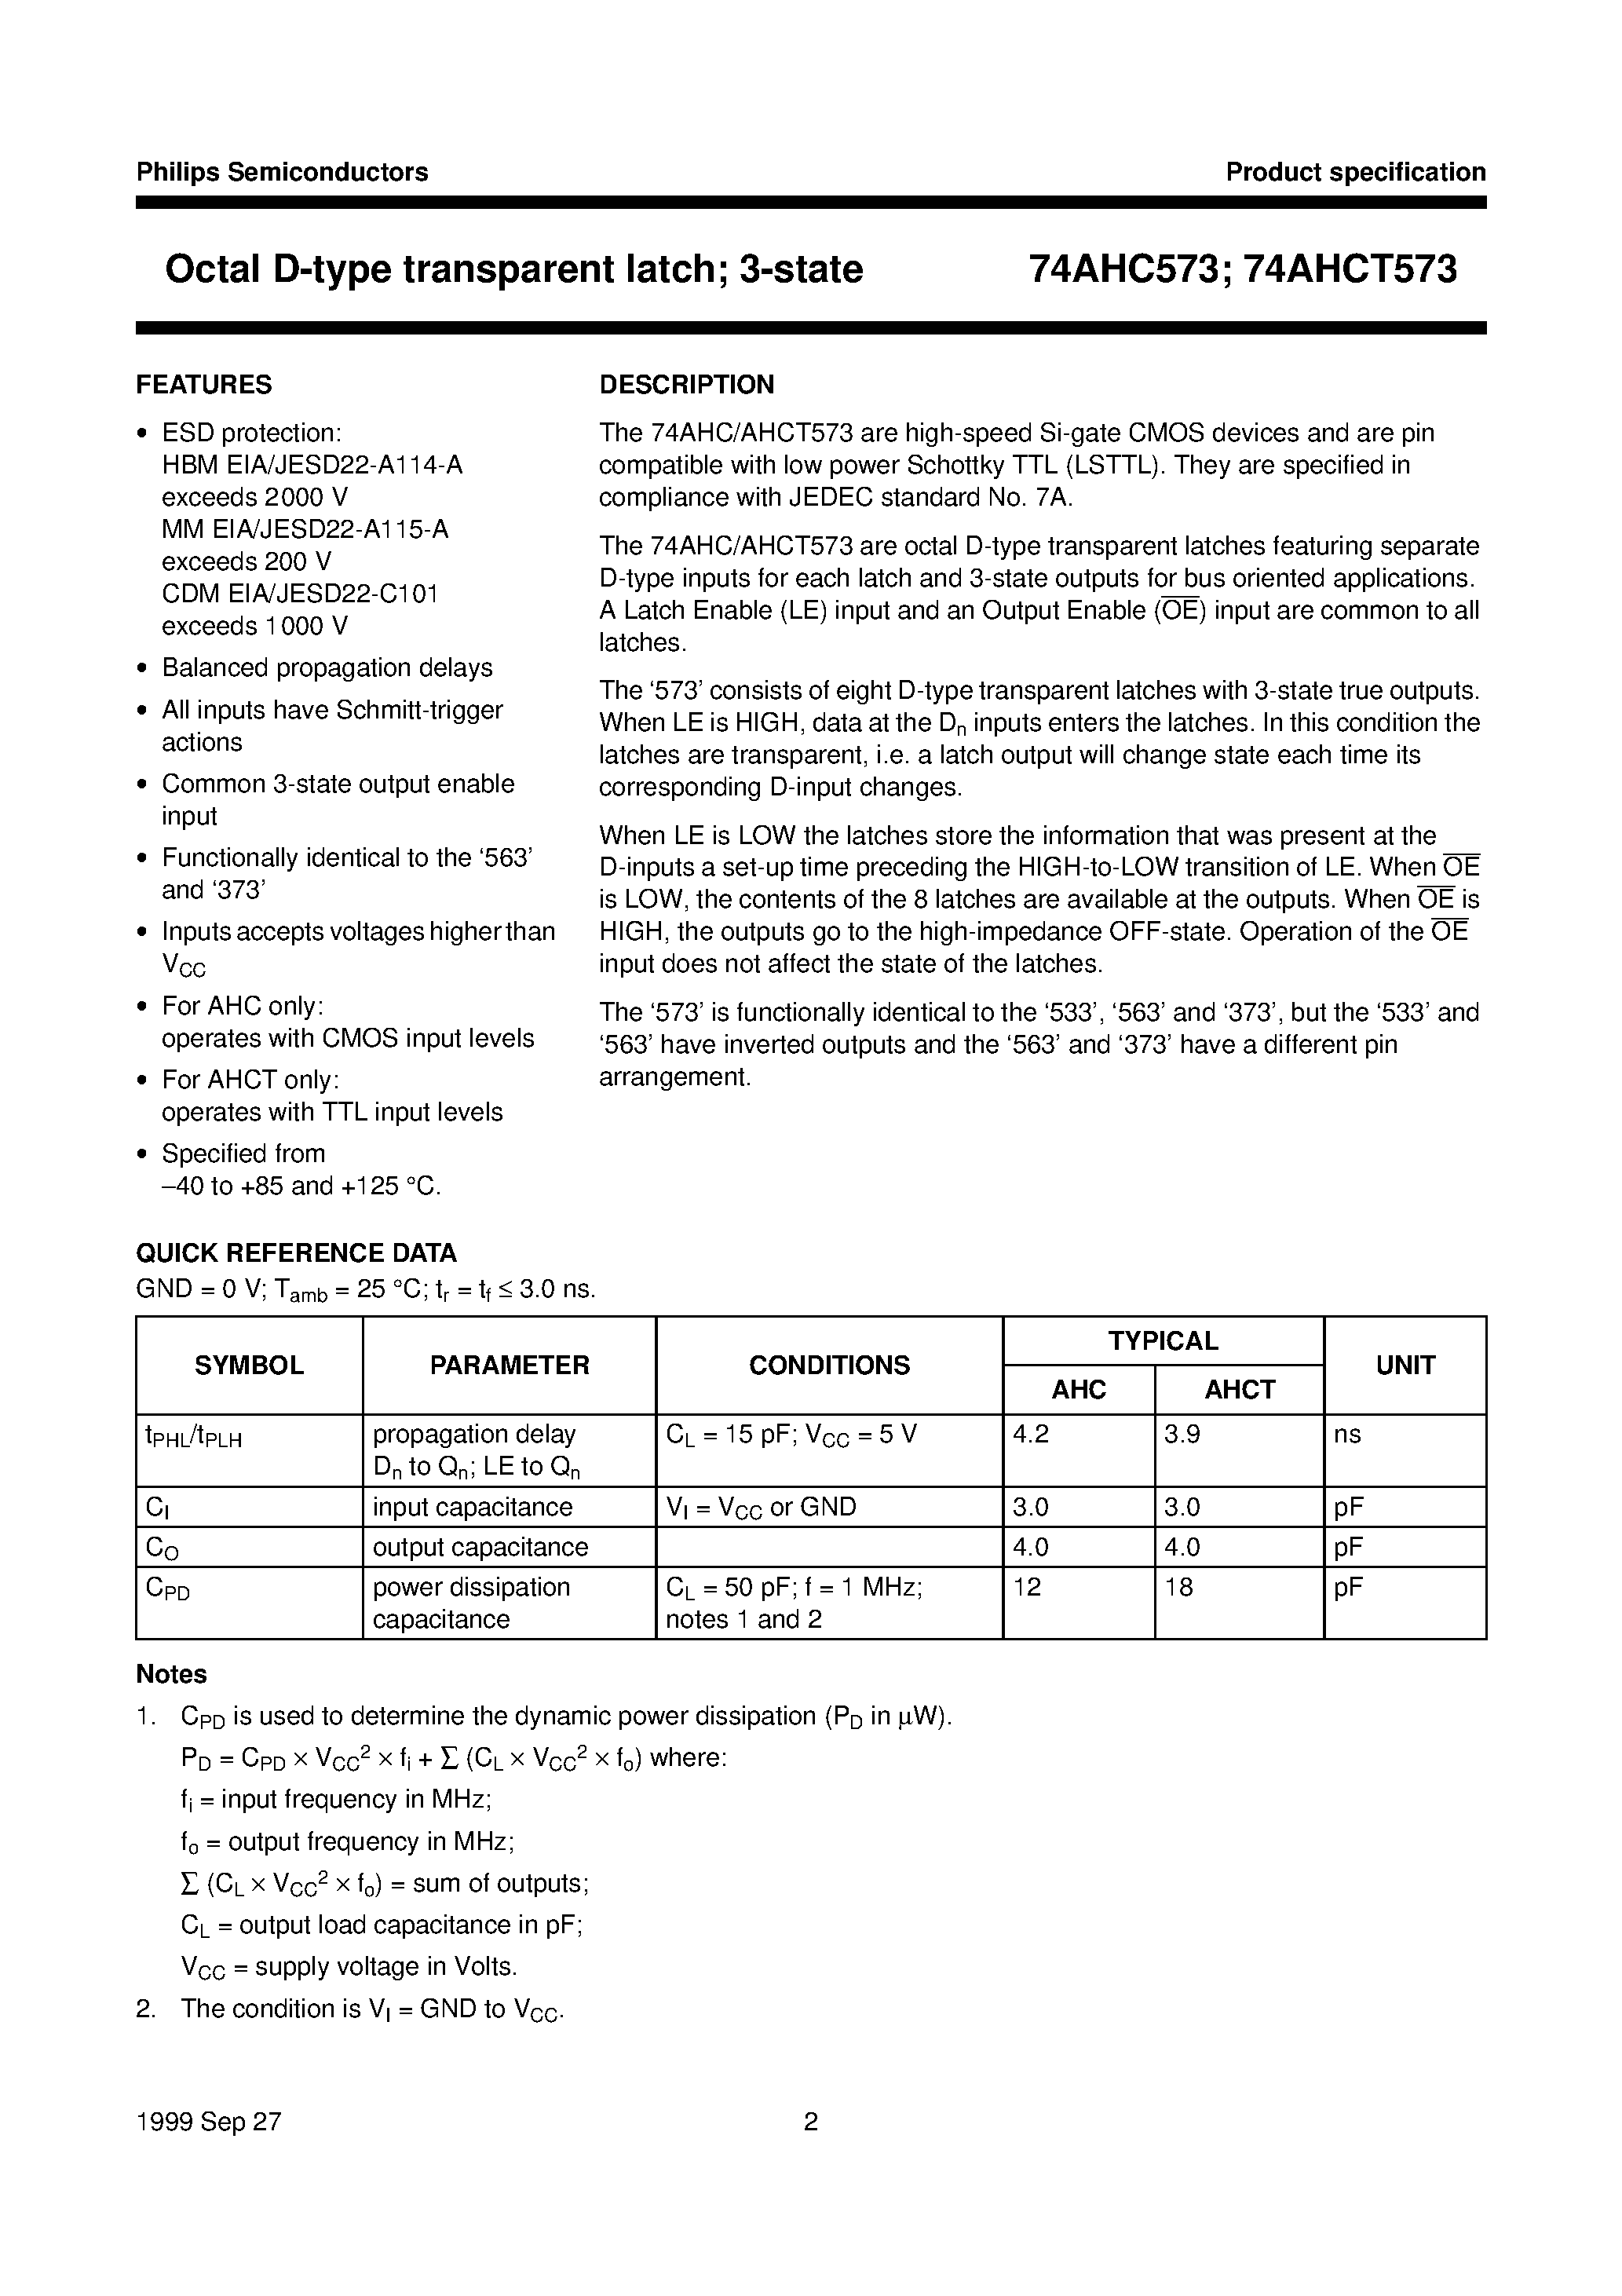 Datasheet 74AHCT573 - Octal D-type transparent latch; 3-state page 2